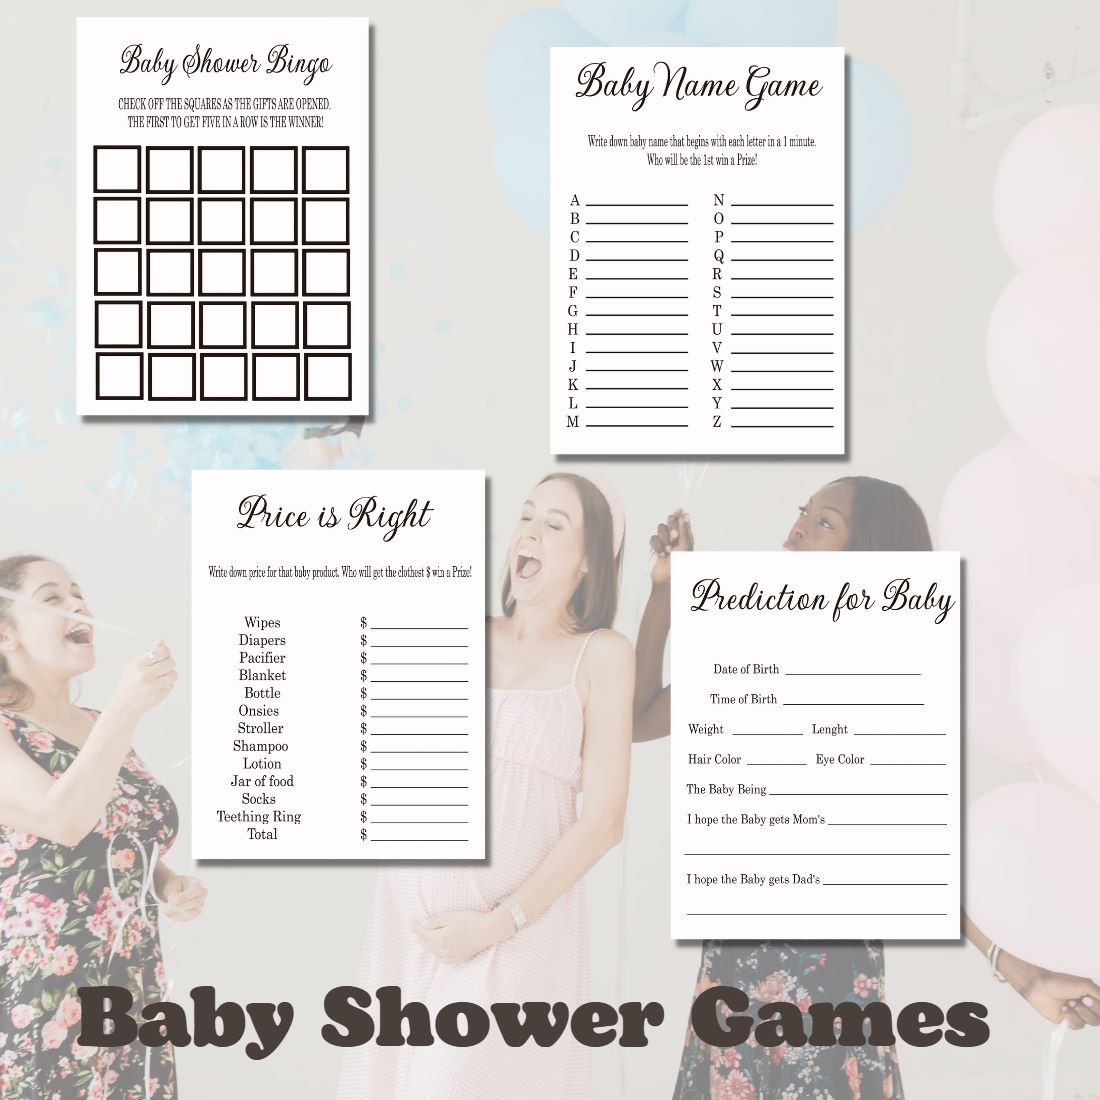 Baby Shower Simple Black and White 4 Games Bundle Set cover image.